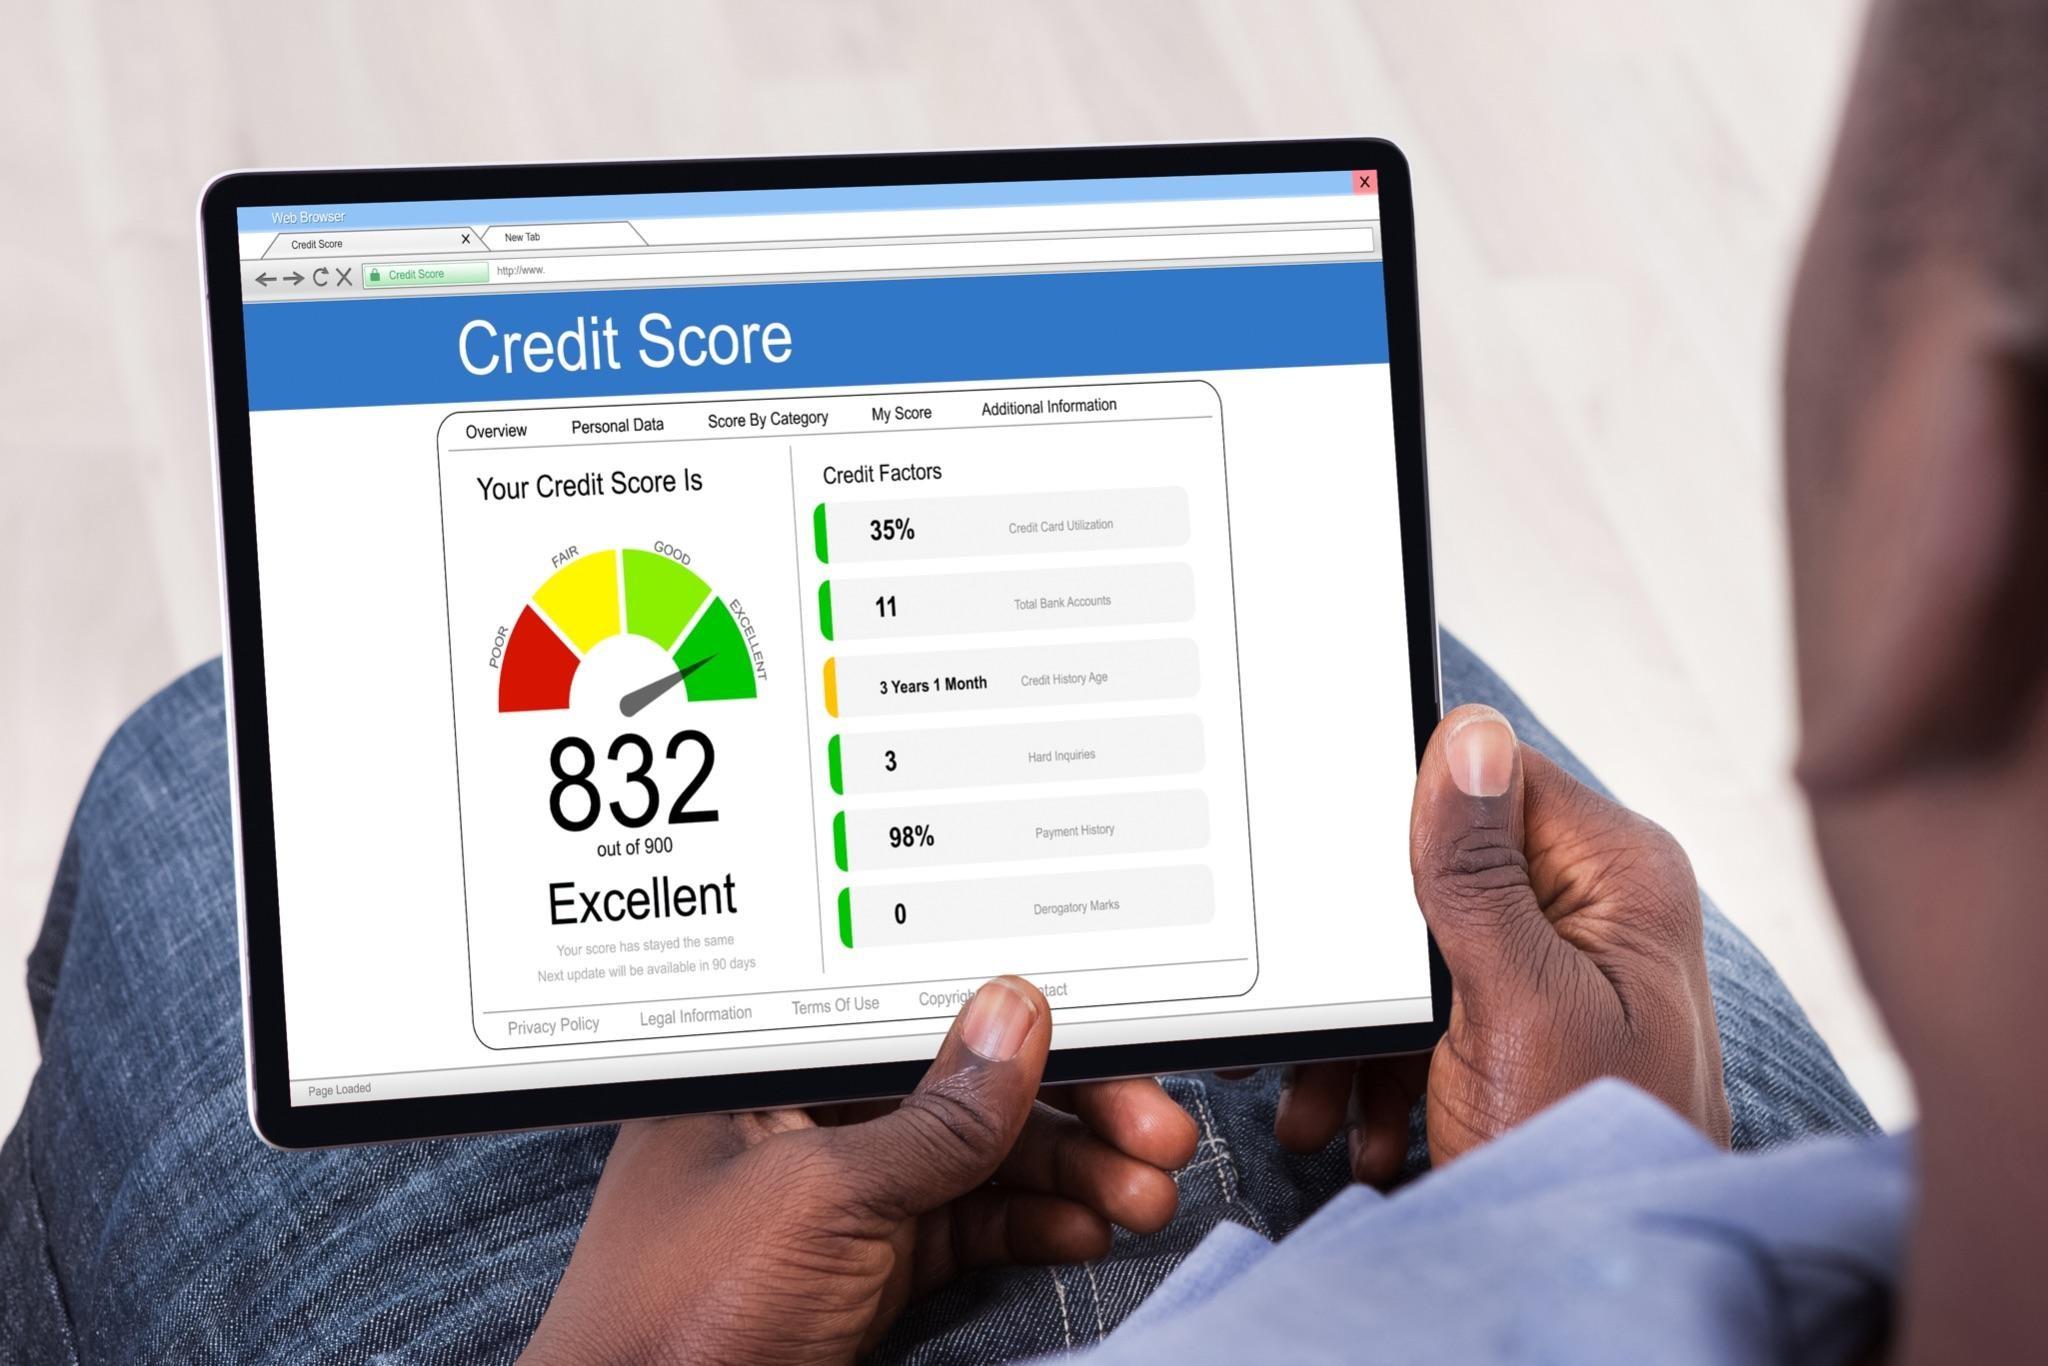 800-Plus Credit Score: How to Make the Most of It